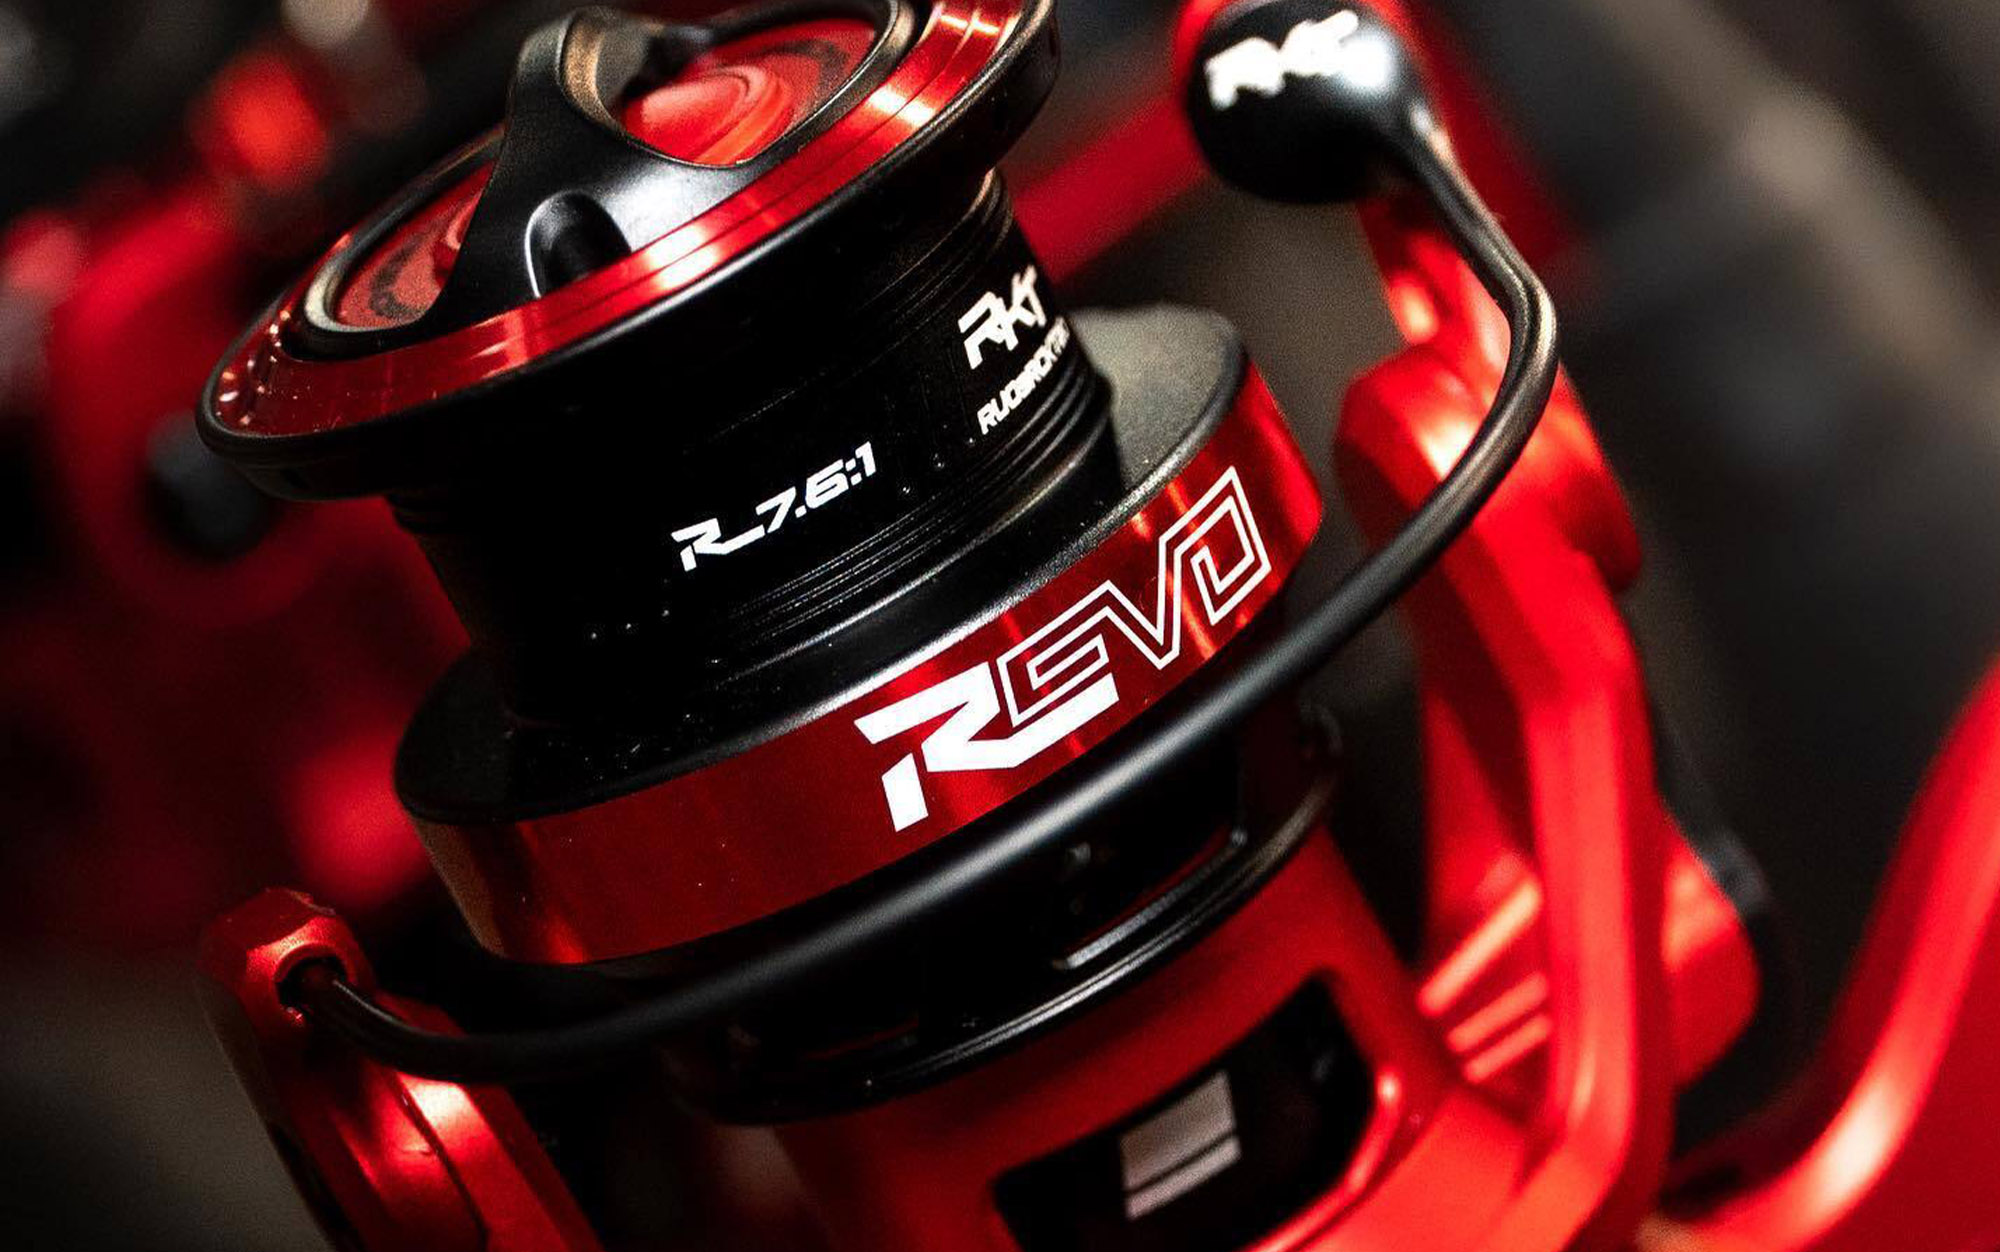 The Revo Rocket's red color is as striking as its features.